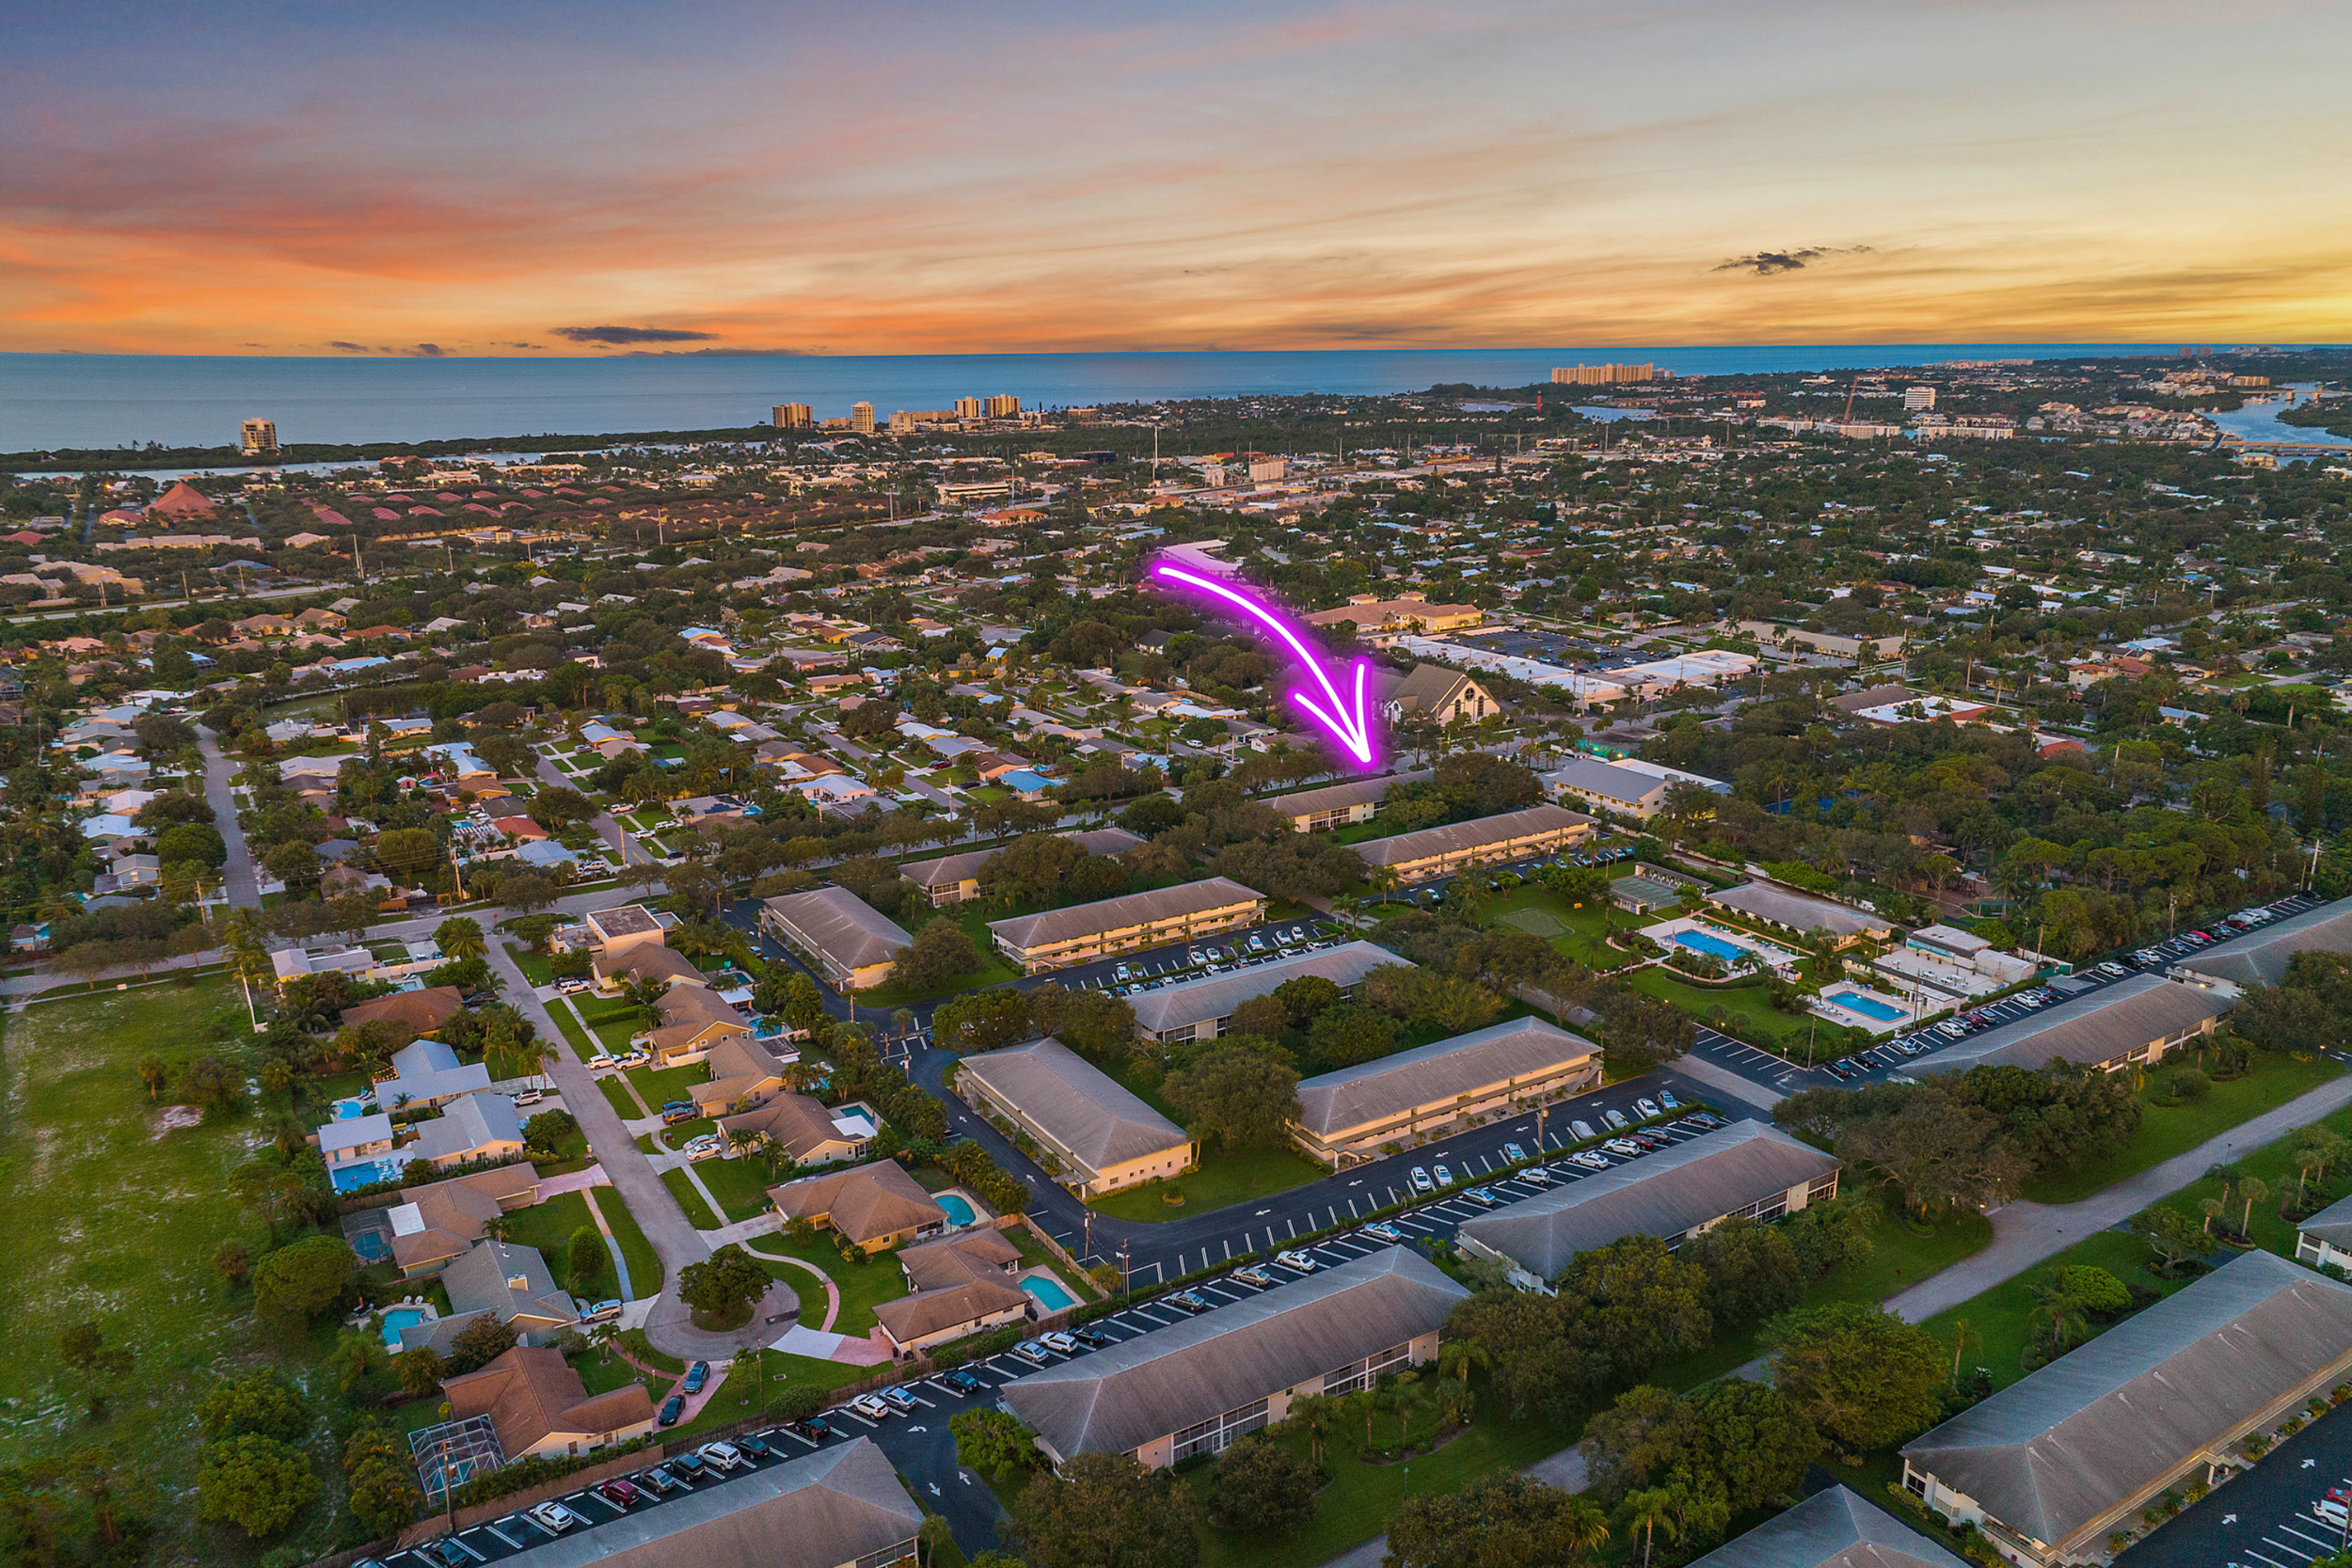 tequesta condo in sought after community tequesta gardens listed for sale by top real estate team